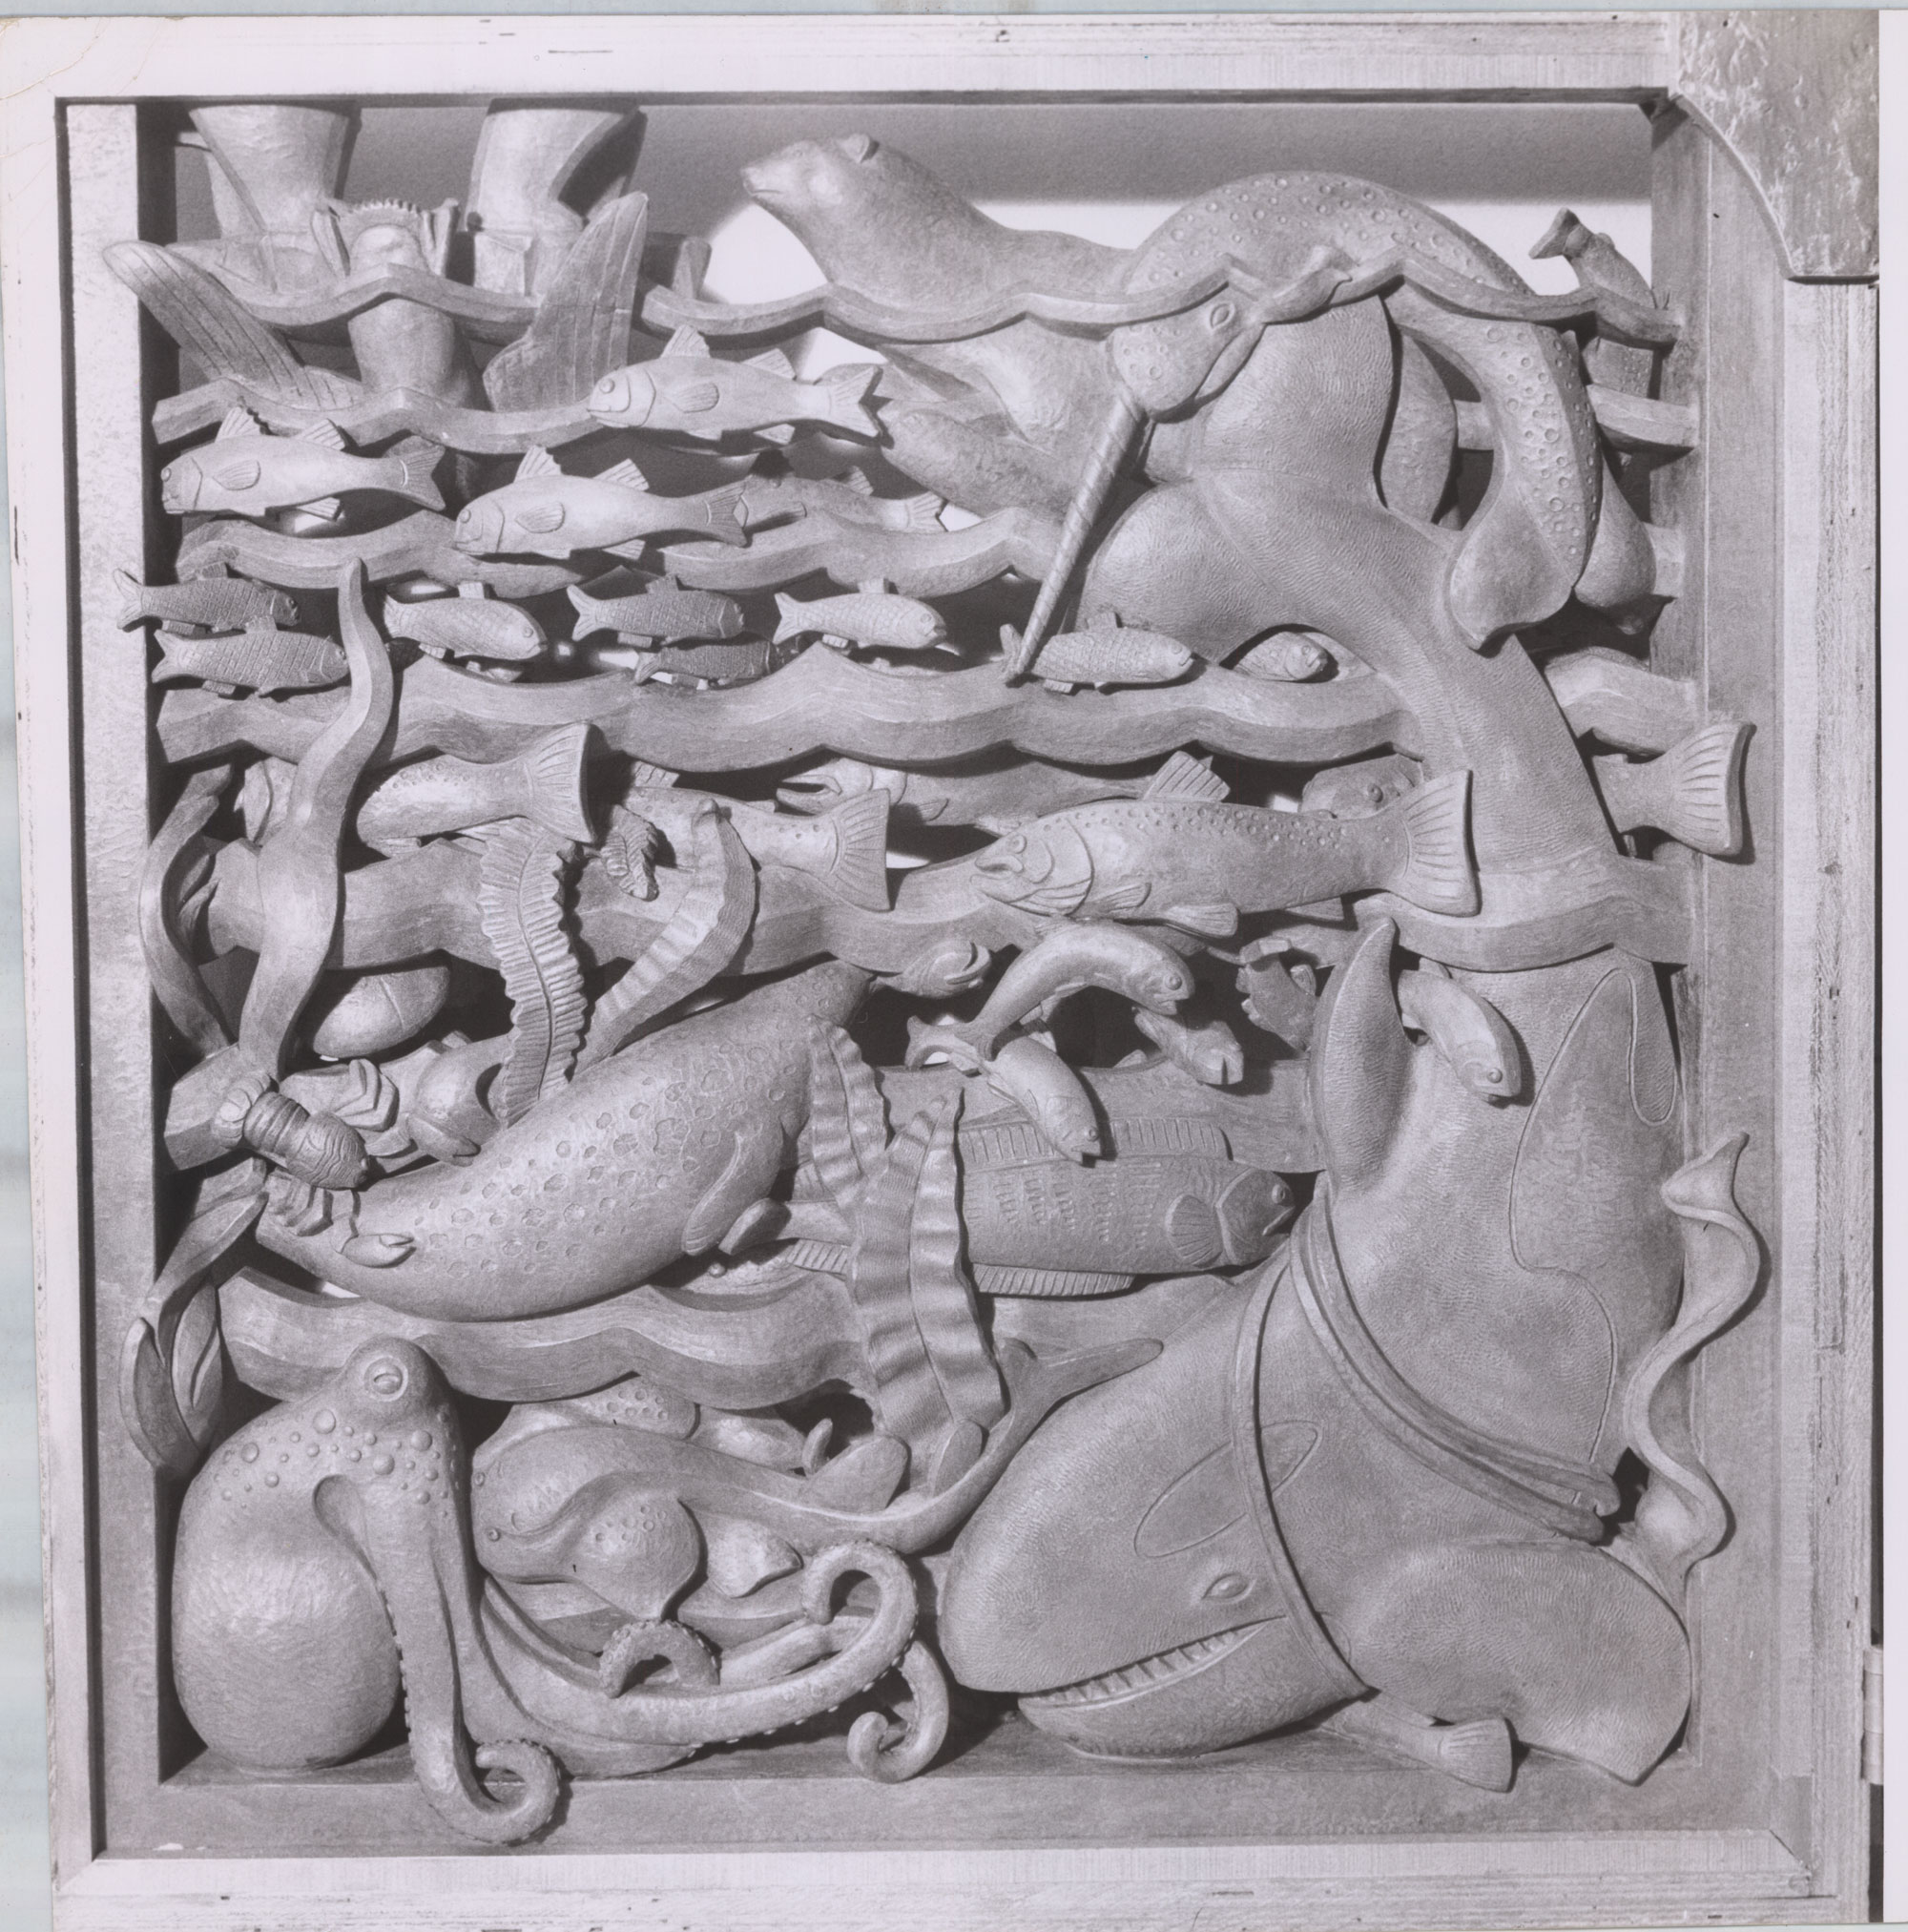 Animals of the sea, sculpture photograph by Byron Chambers, 20th century. Courtesy Washington National Cathedral Construction Archives Collection.